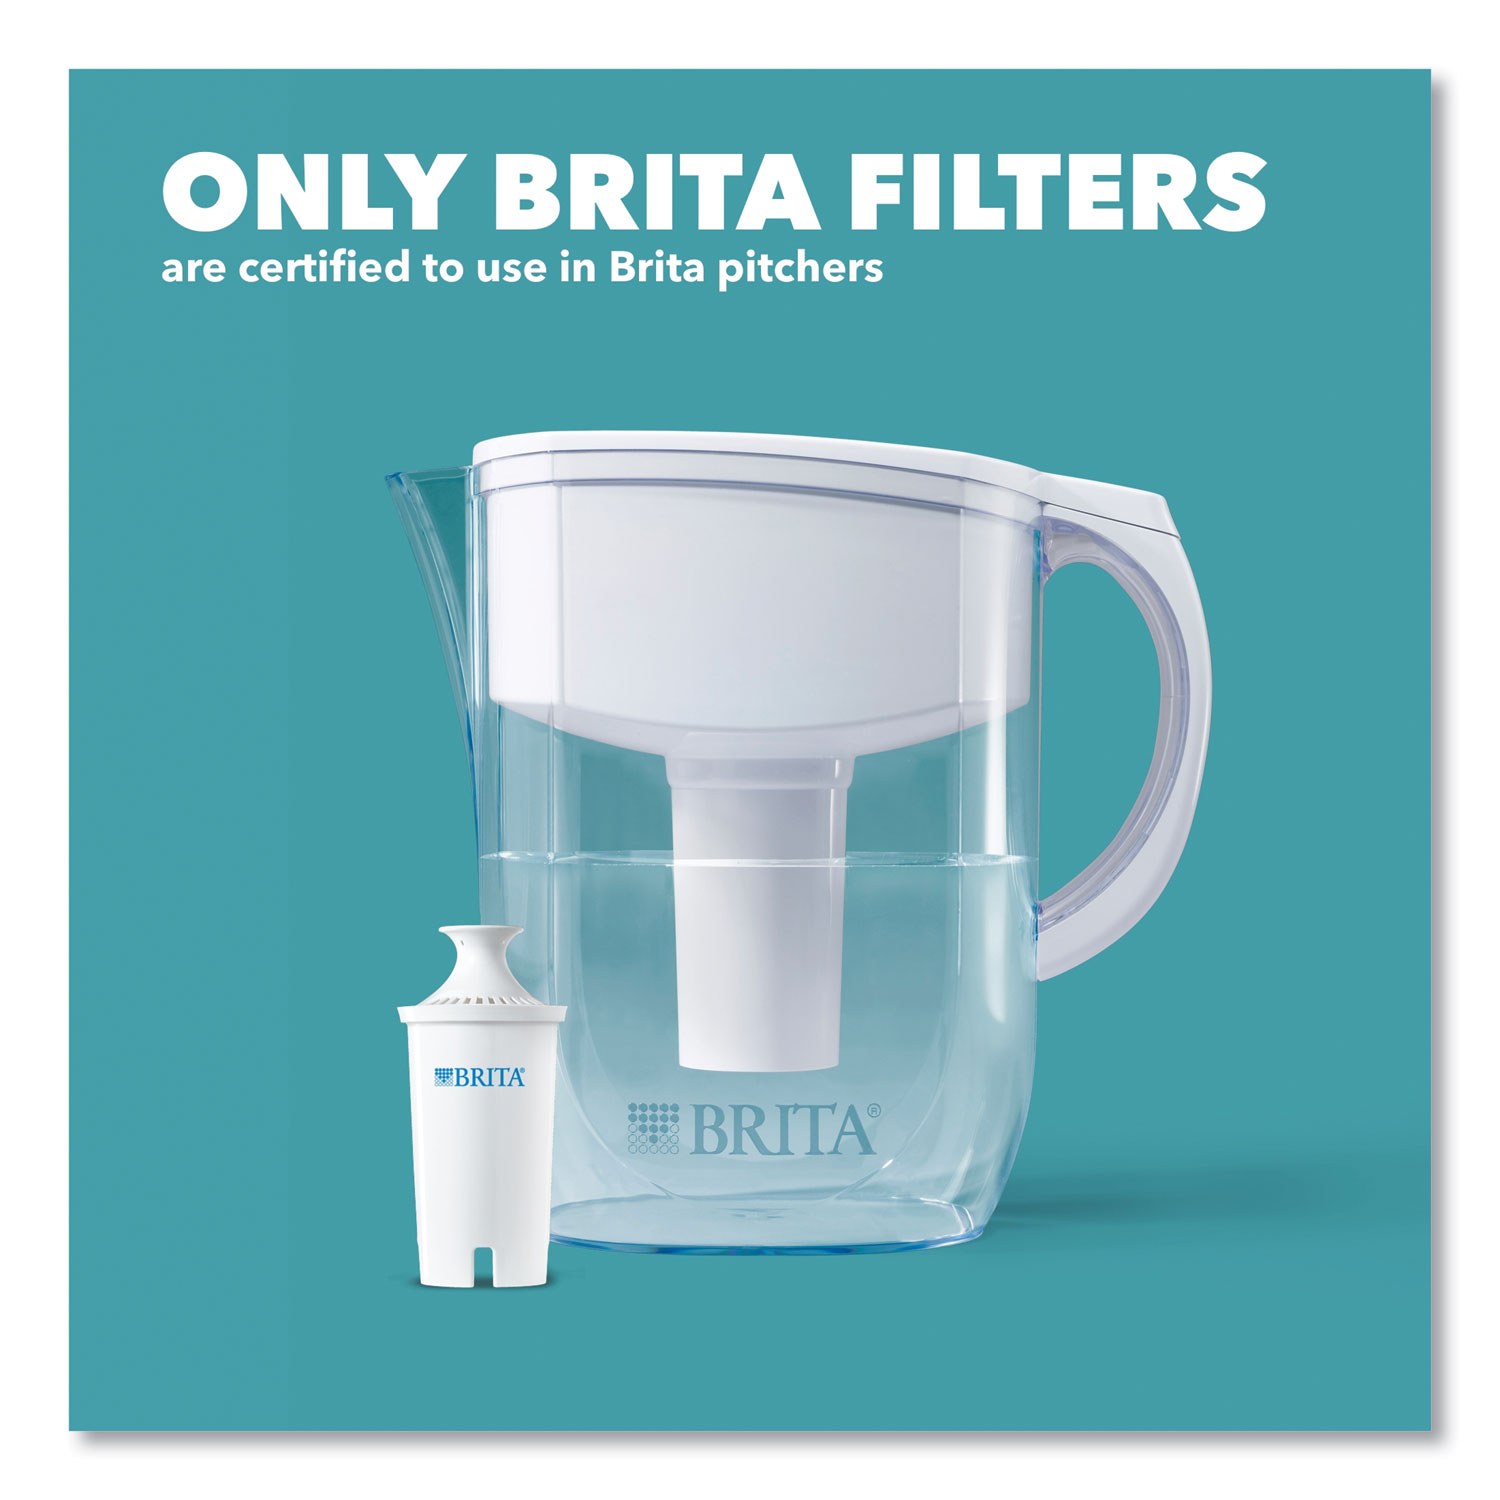  Brita 3 Count Water Filter Pitcher Advanced Replacement Filters  (Packaging May Vary) (3 Pack) : Tools & Home Improvement